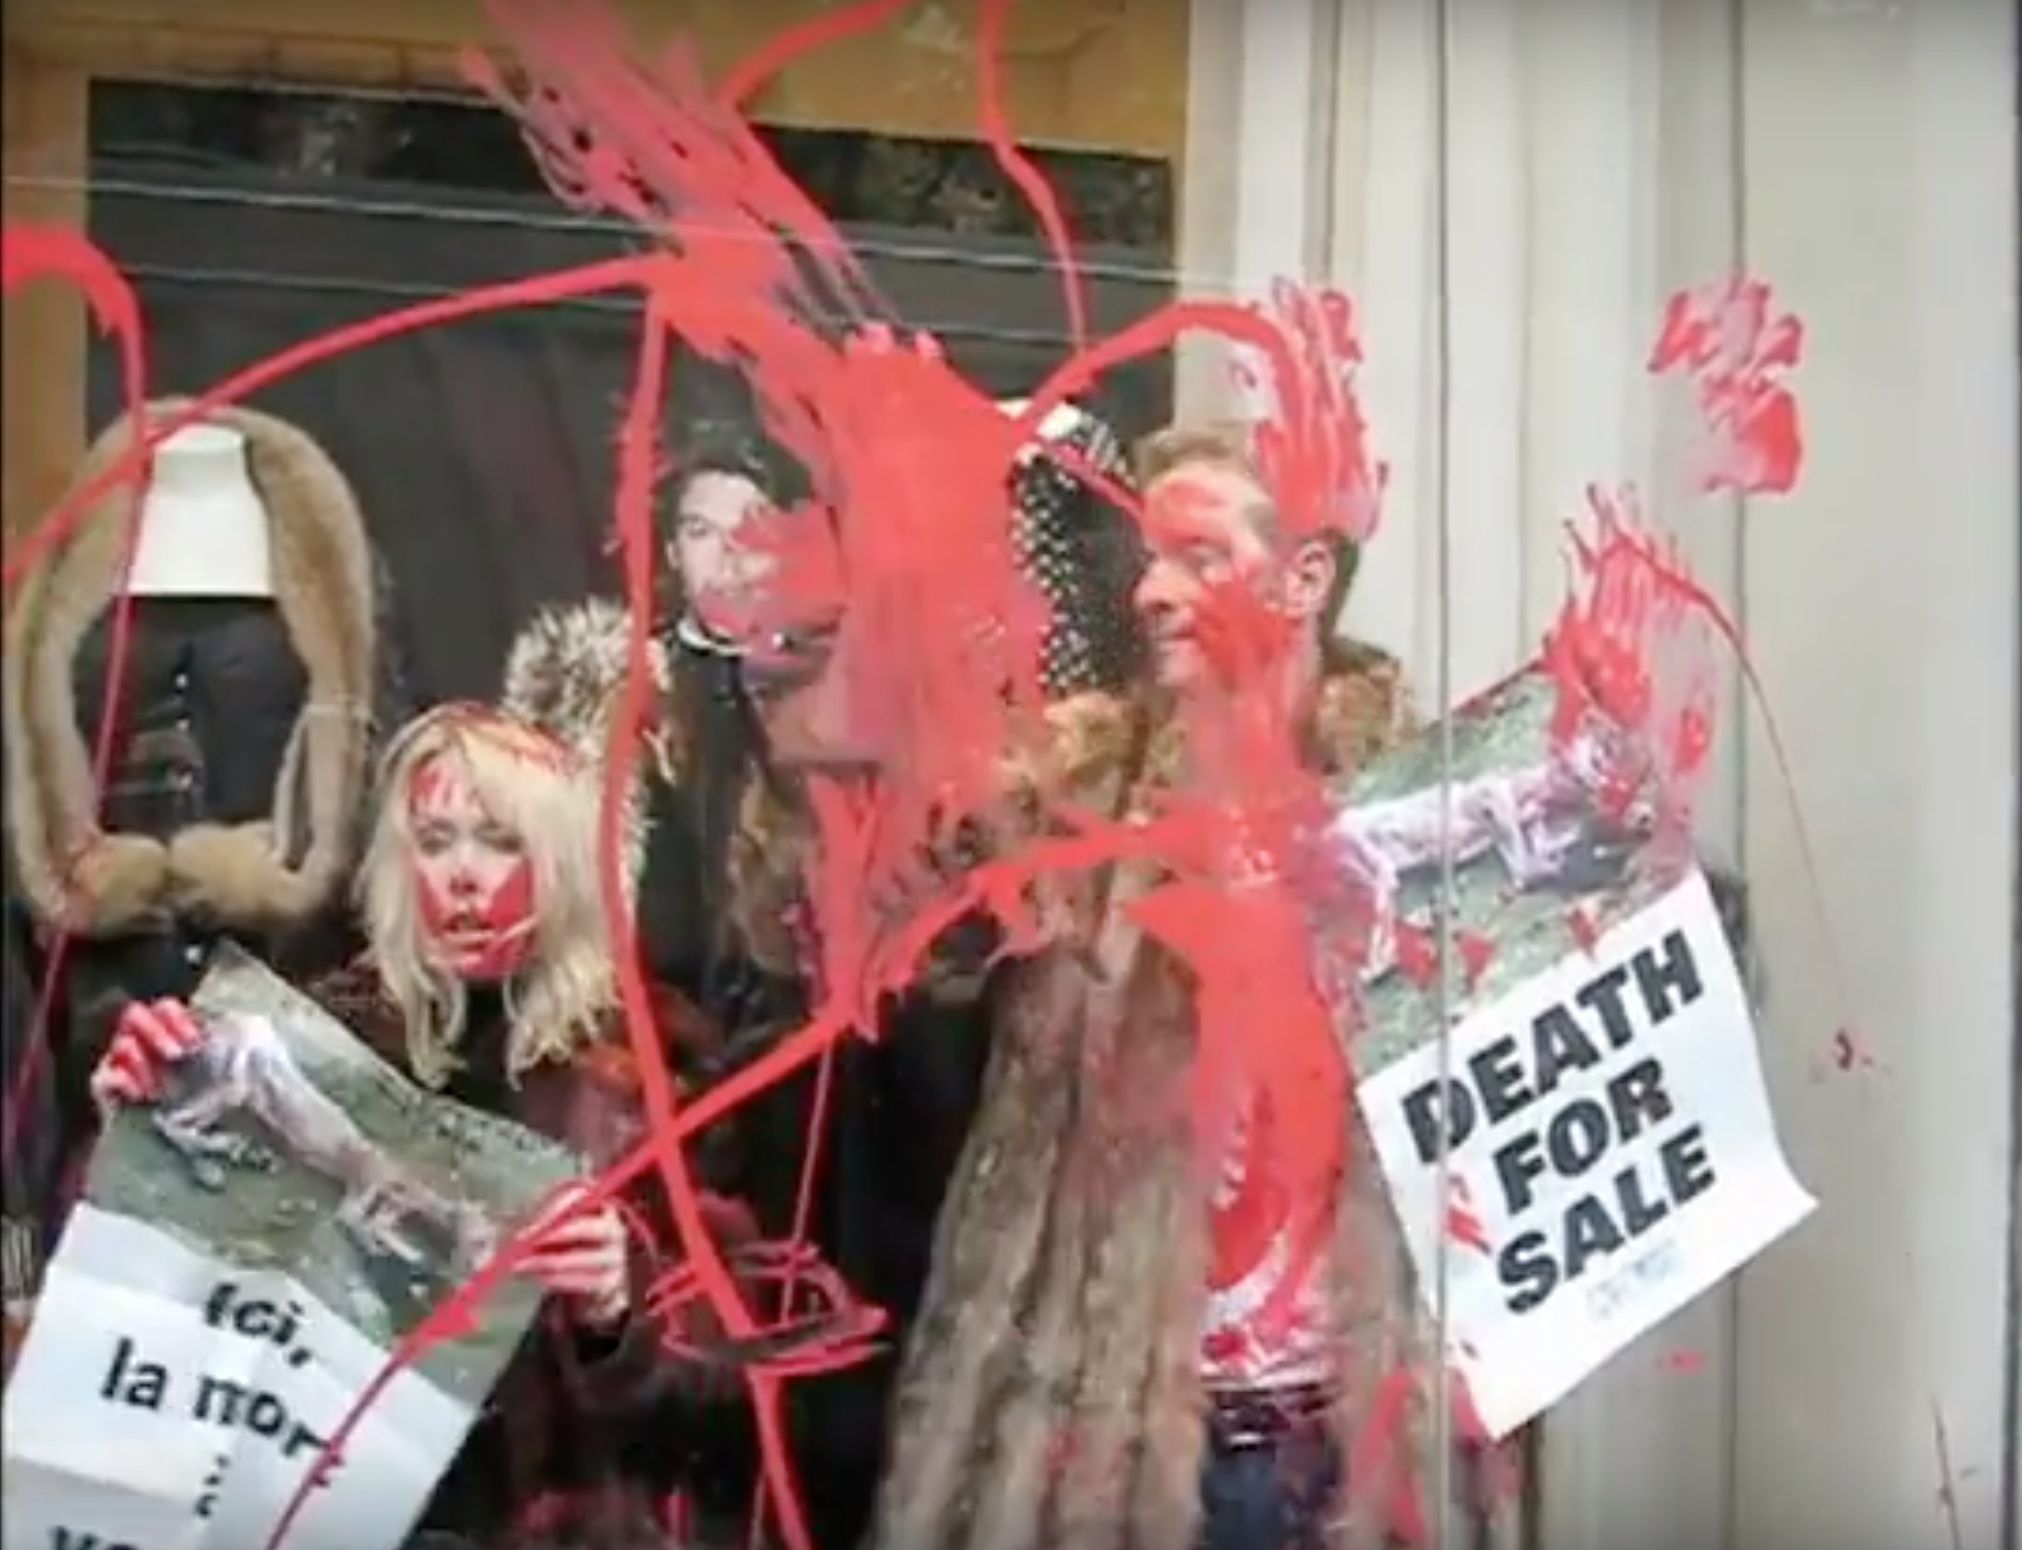 Jean Paul Gaultier Announces The End of Fur, Calling It “Absolutely Deplorable”